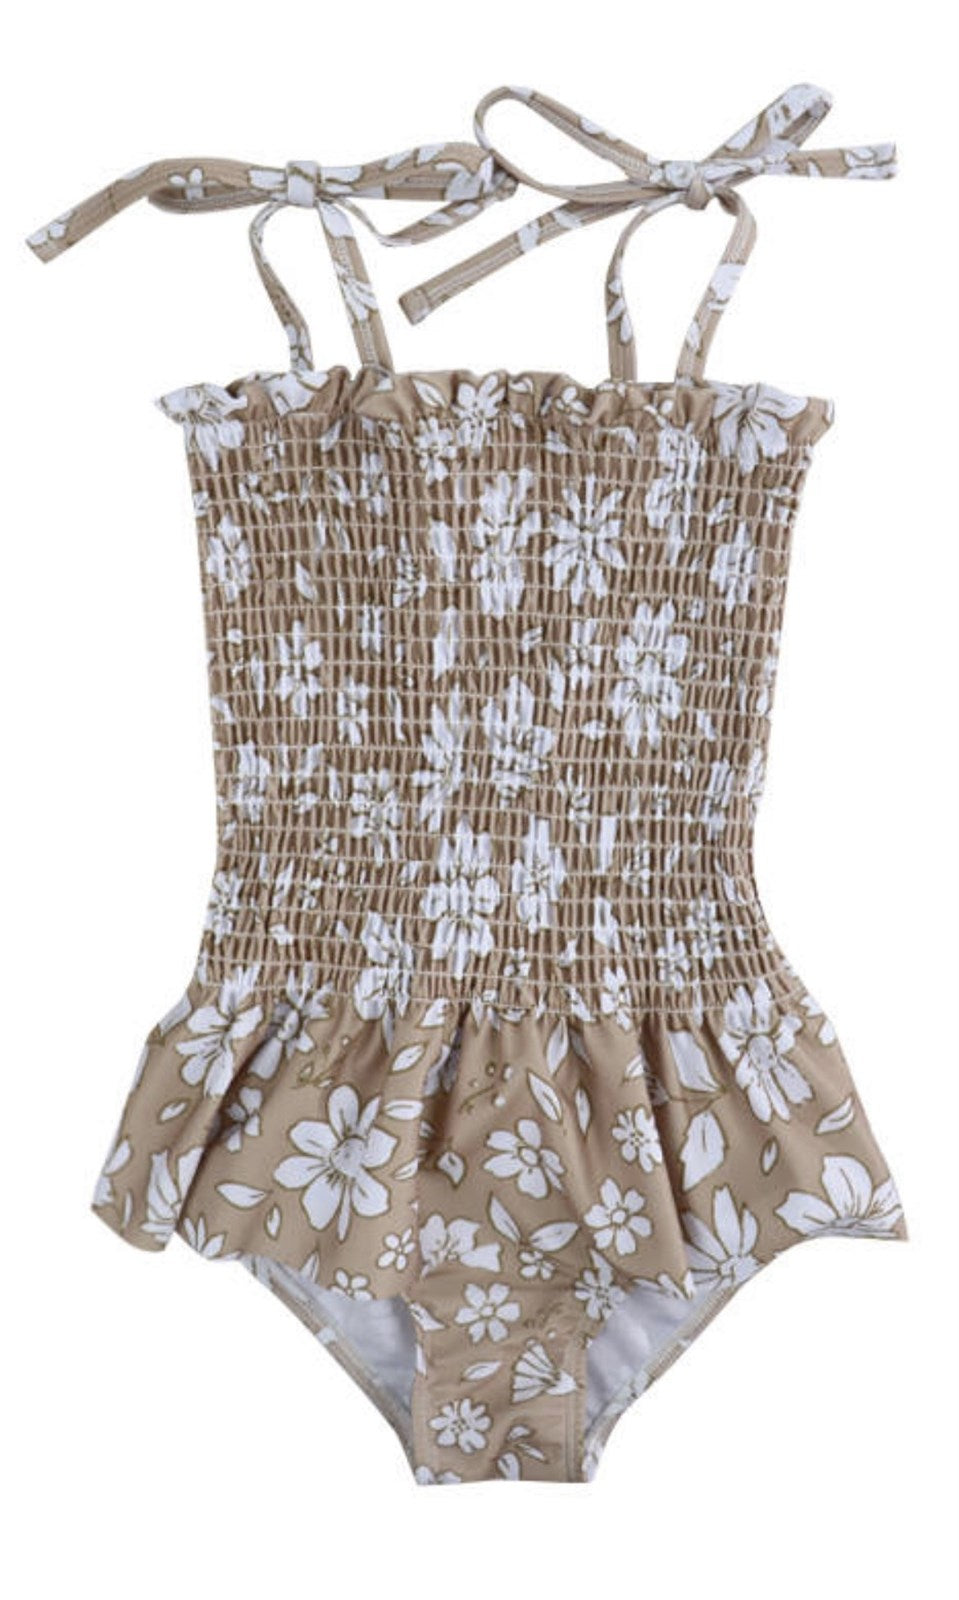 Girls Swimsuits - Tan White Floral - 1 Pc Accordion